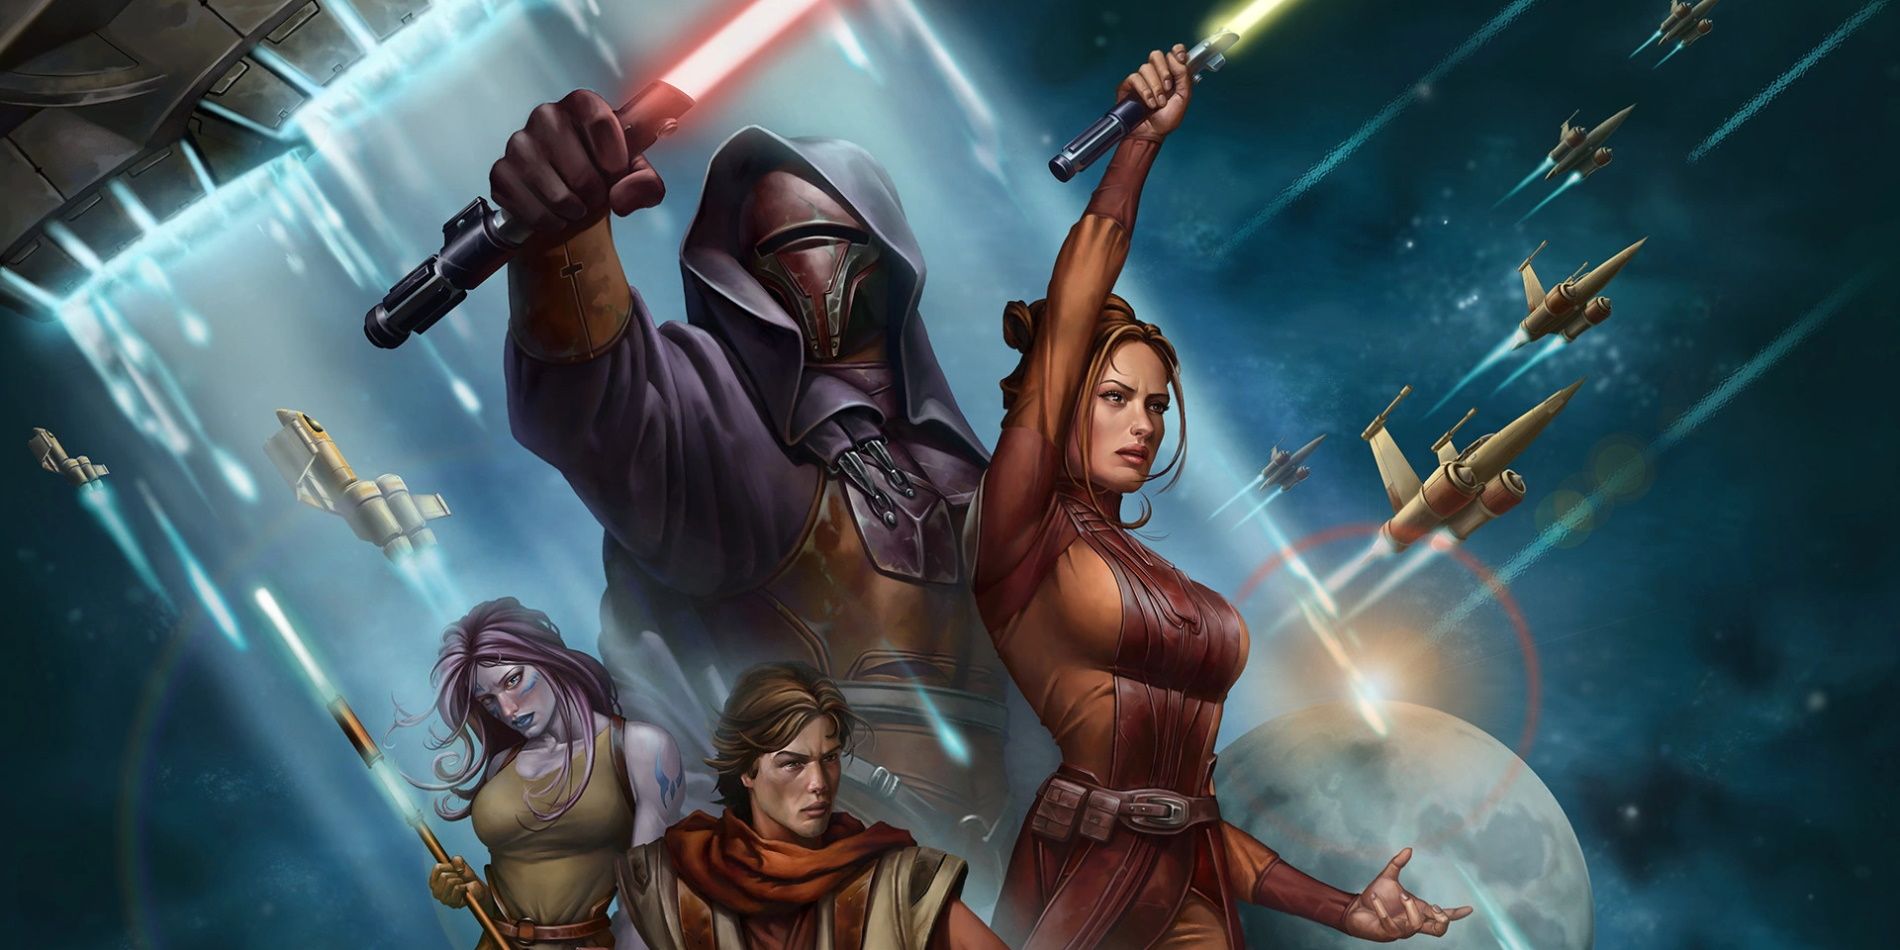 Characters from Knights of the Old Republic stand together in classic Star Wars-style key art.